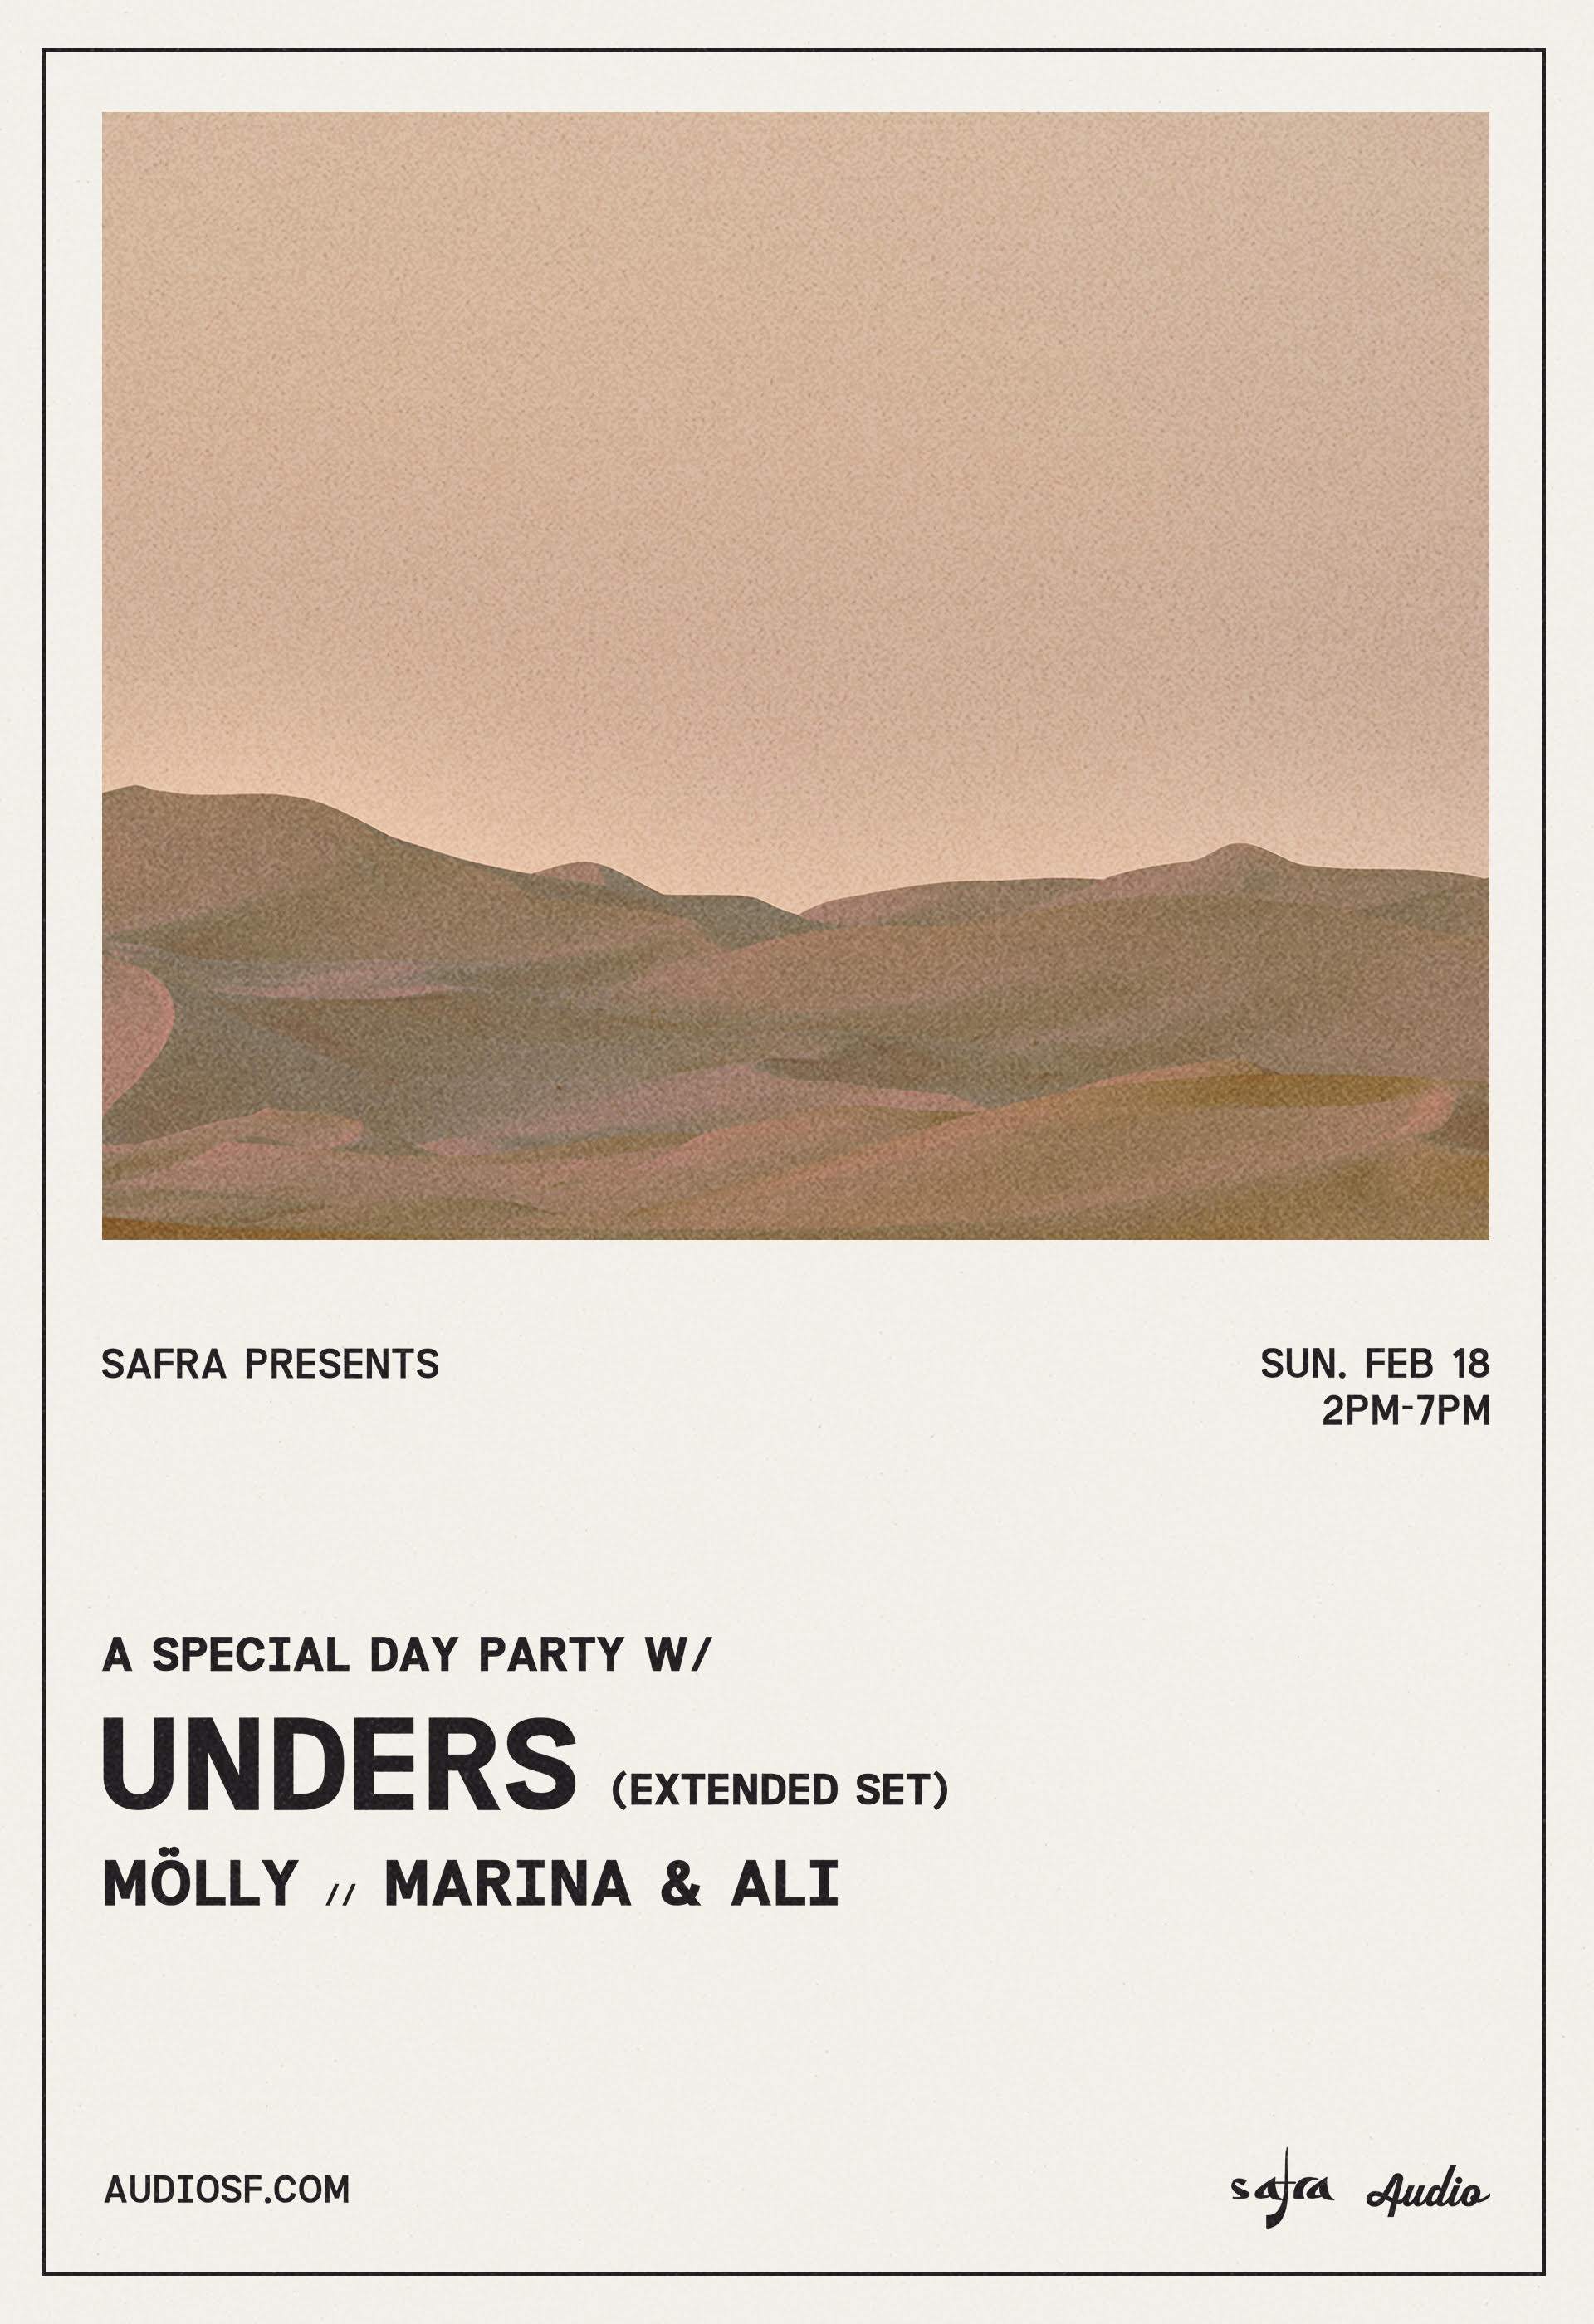 Sunset party with Unders - フライヤー表